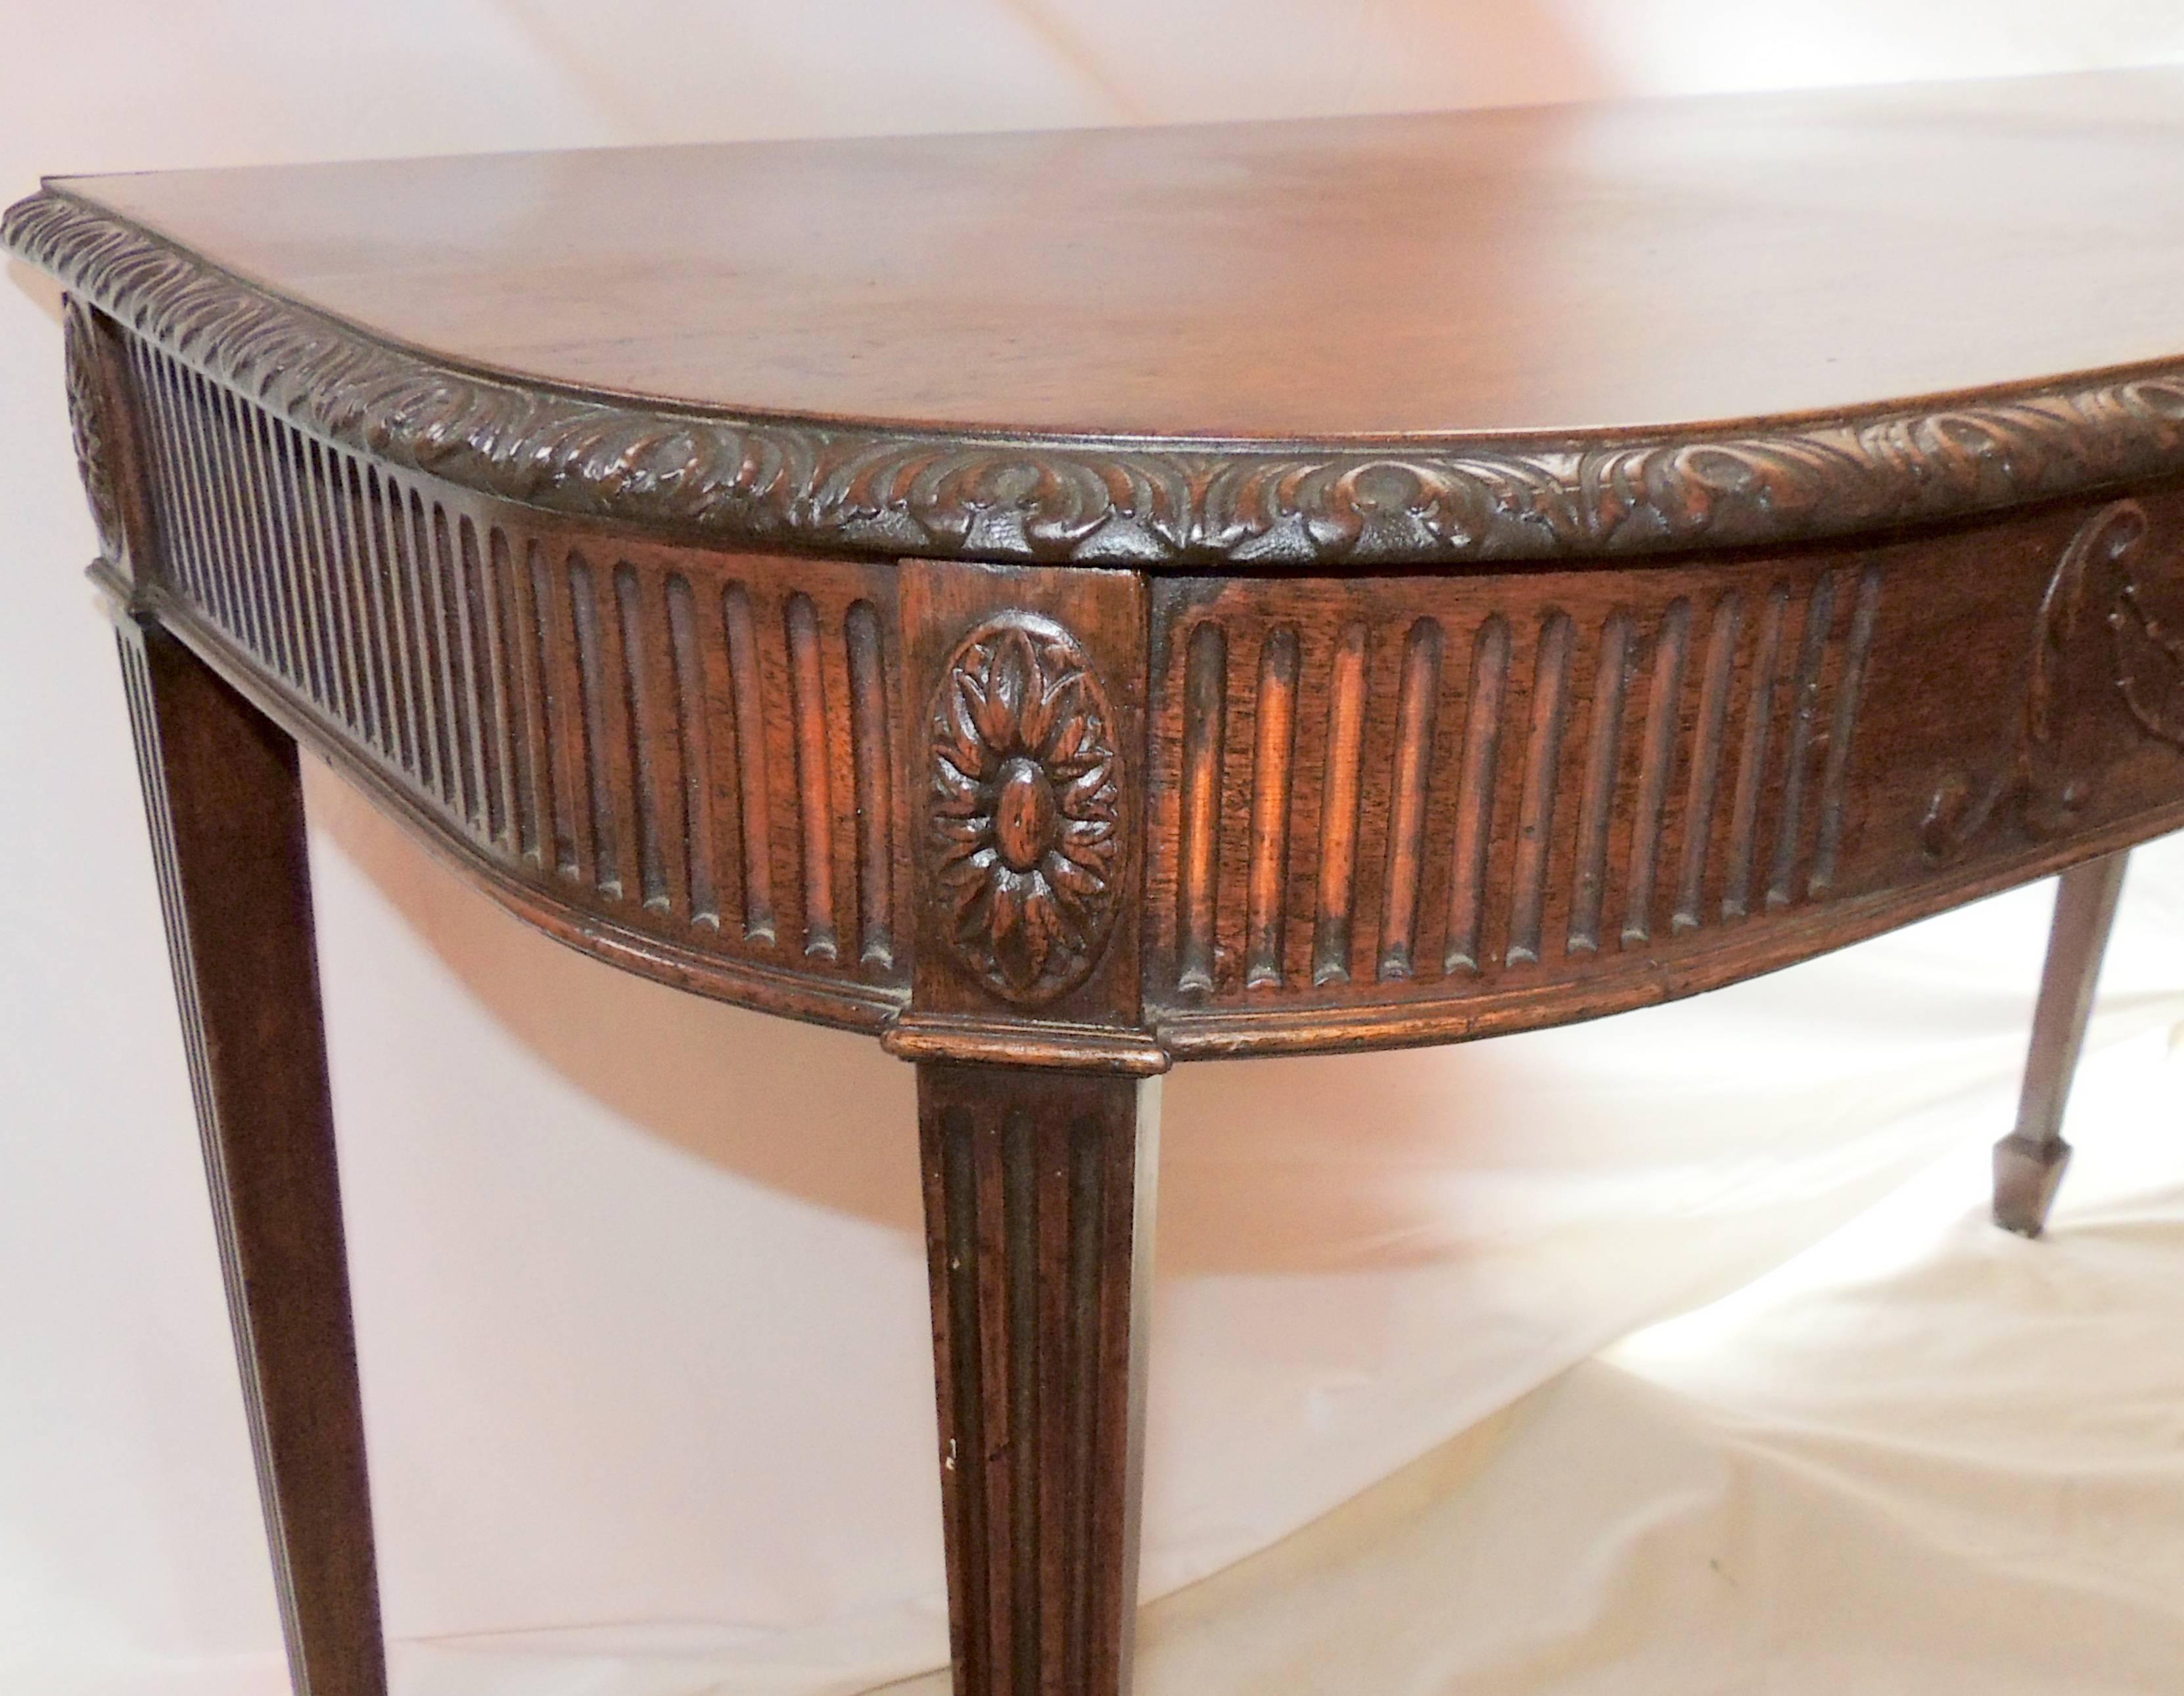 A handsome Federal style pair of carved English console tables or servers in The Duncan Phyfe manner finished with an urn center medallion, and carved border flutted legs.

Measures: 47.5" W x 30.5" H x 22" D.